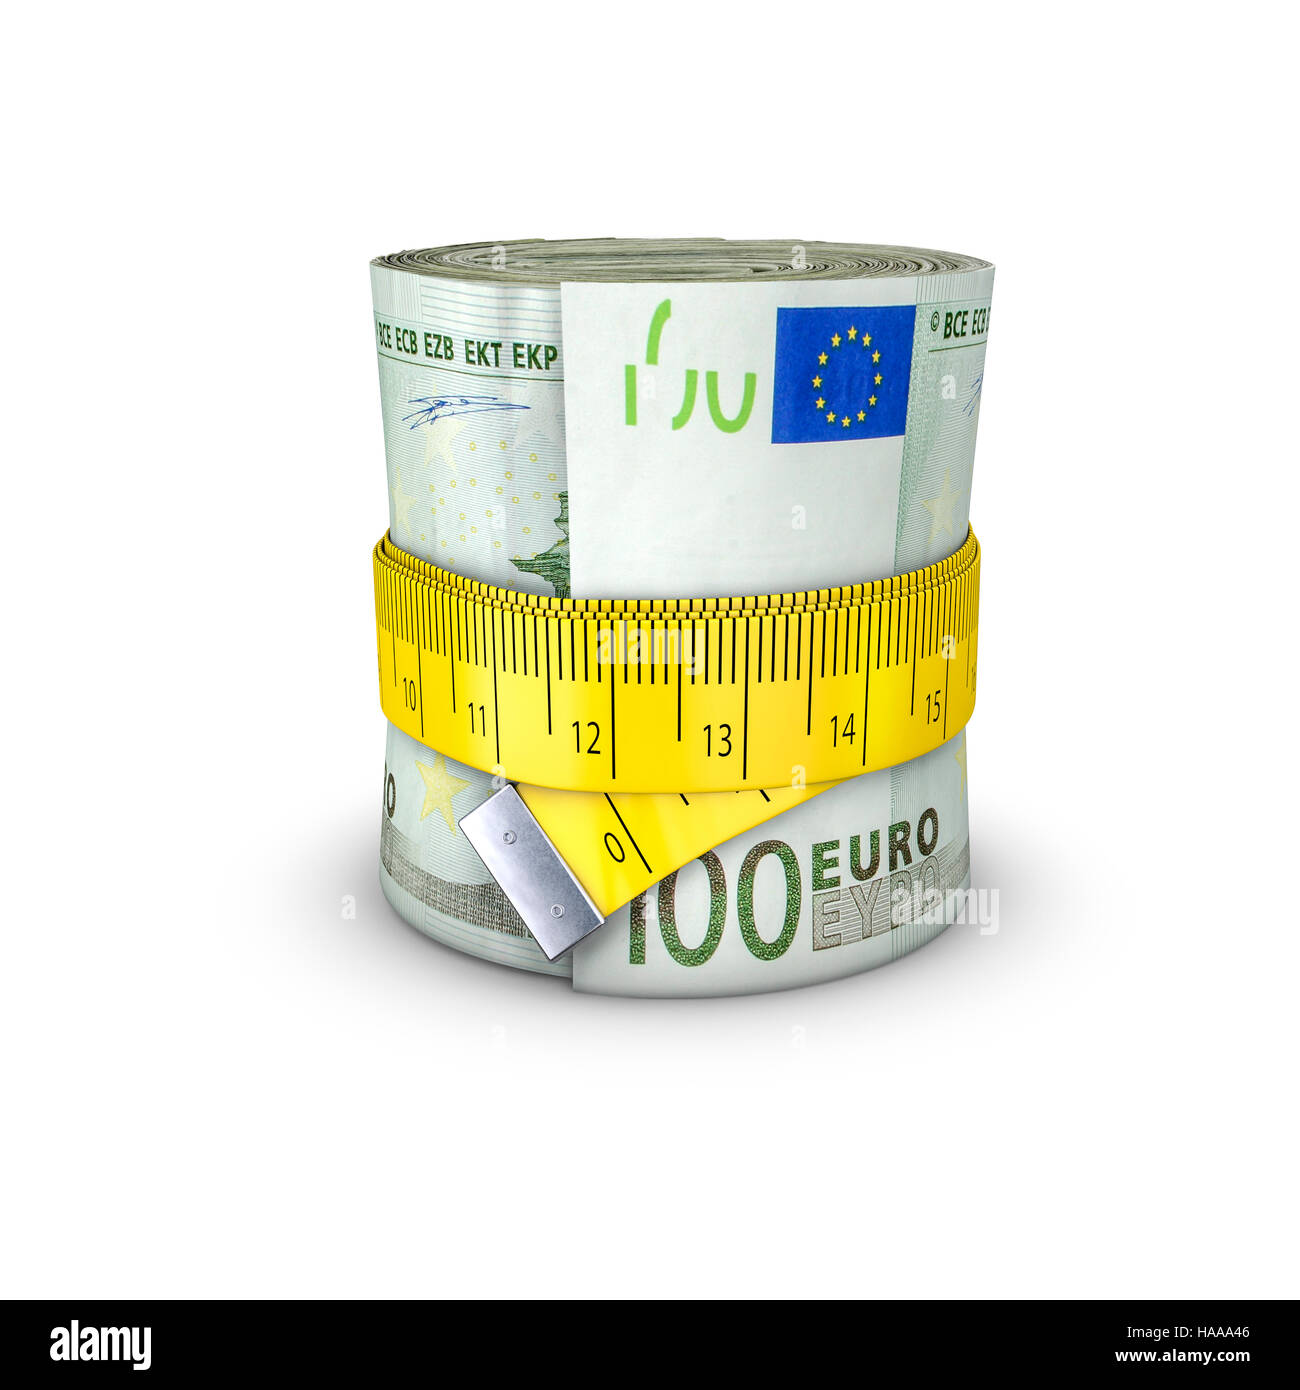 Tape measure euros / 3D illustration of measuring tape tightening around roll of bank notes Stock Photo